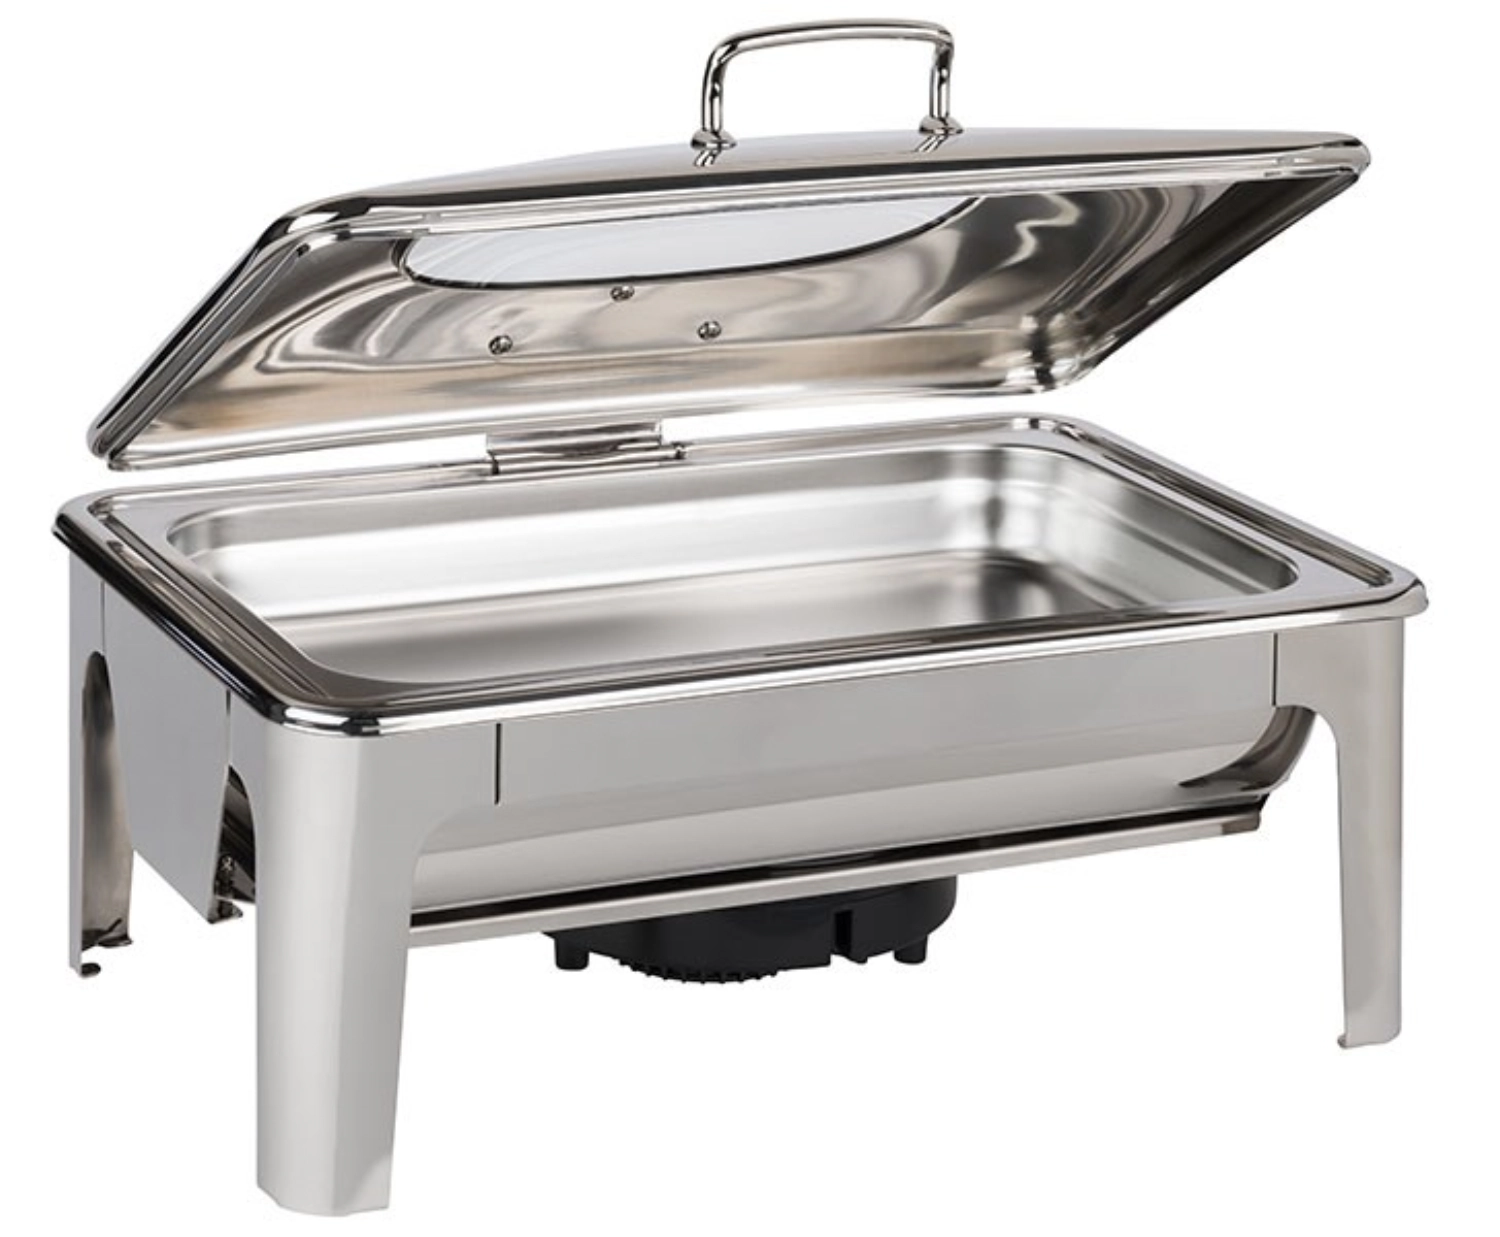 Gn 1/1 chafing dish easy induction